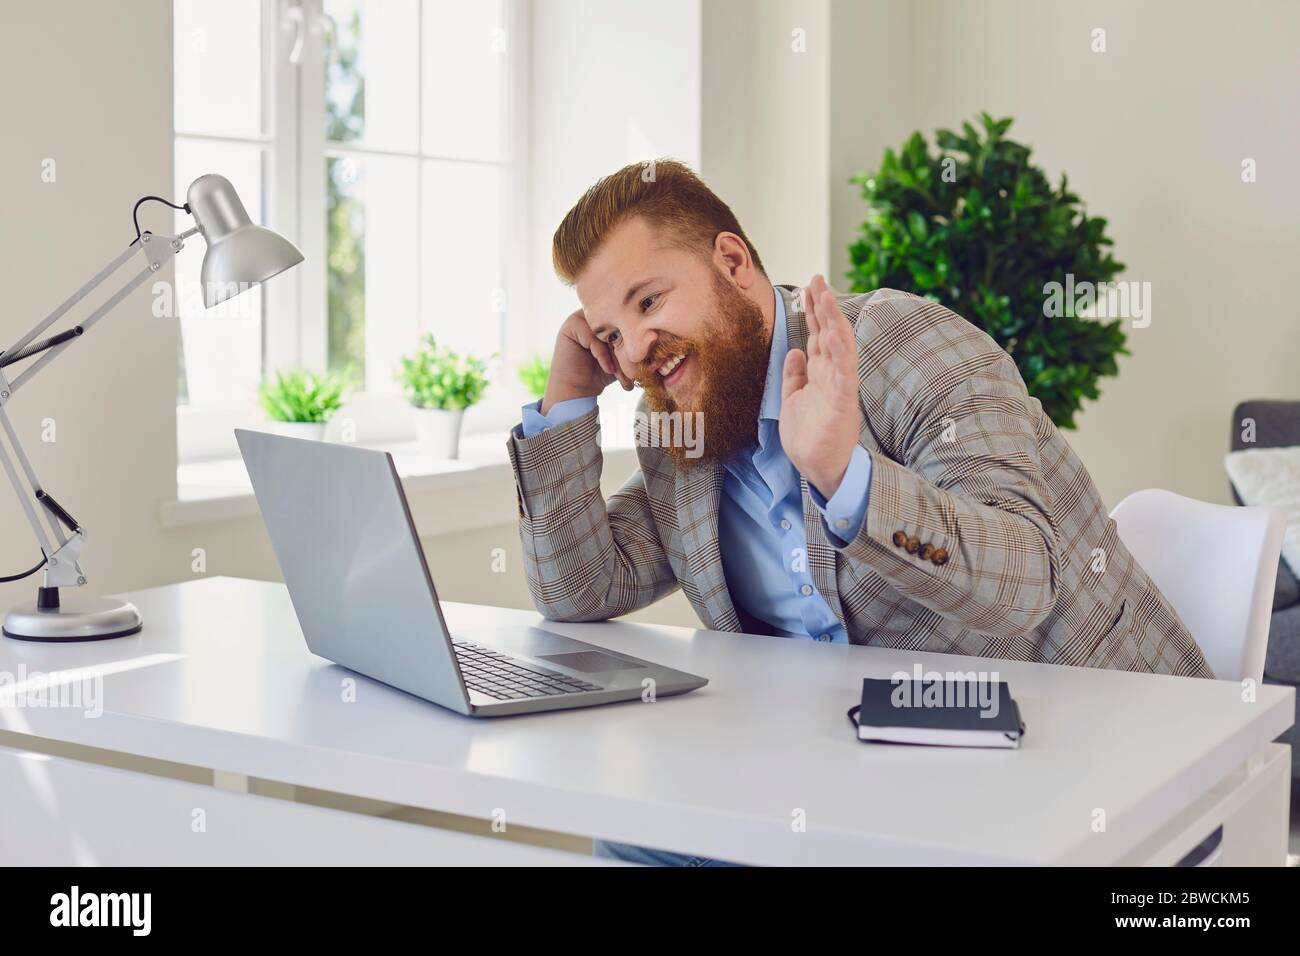 Online chat video call. Positive businessman making video call via laptop and waving hand. Stock Photo